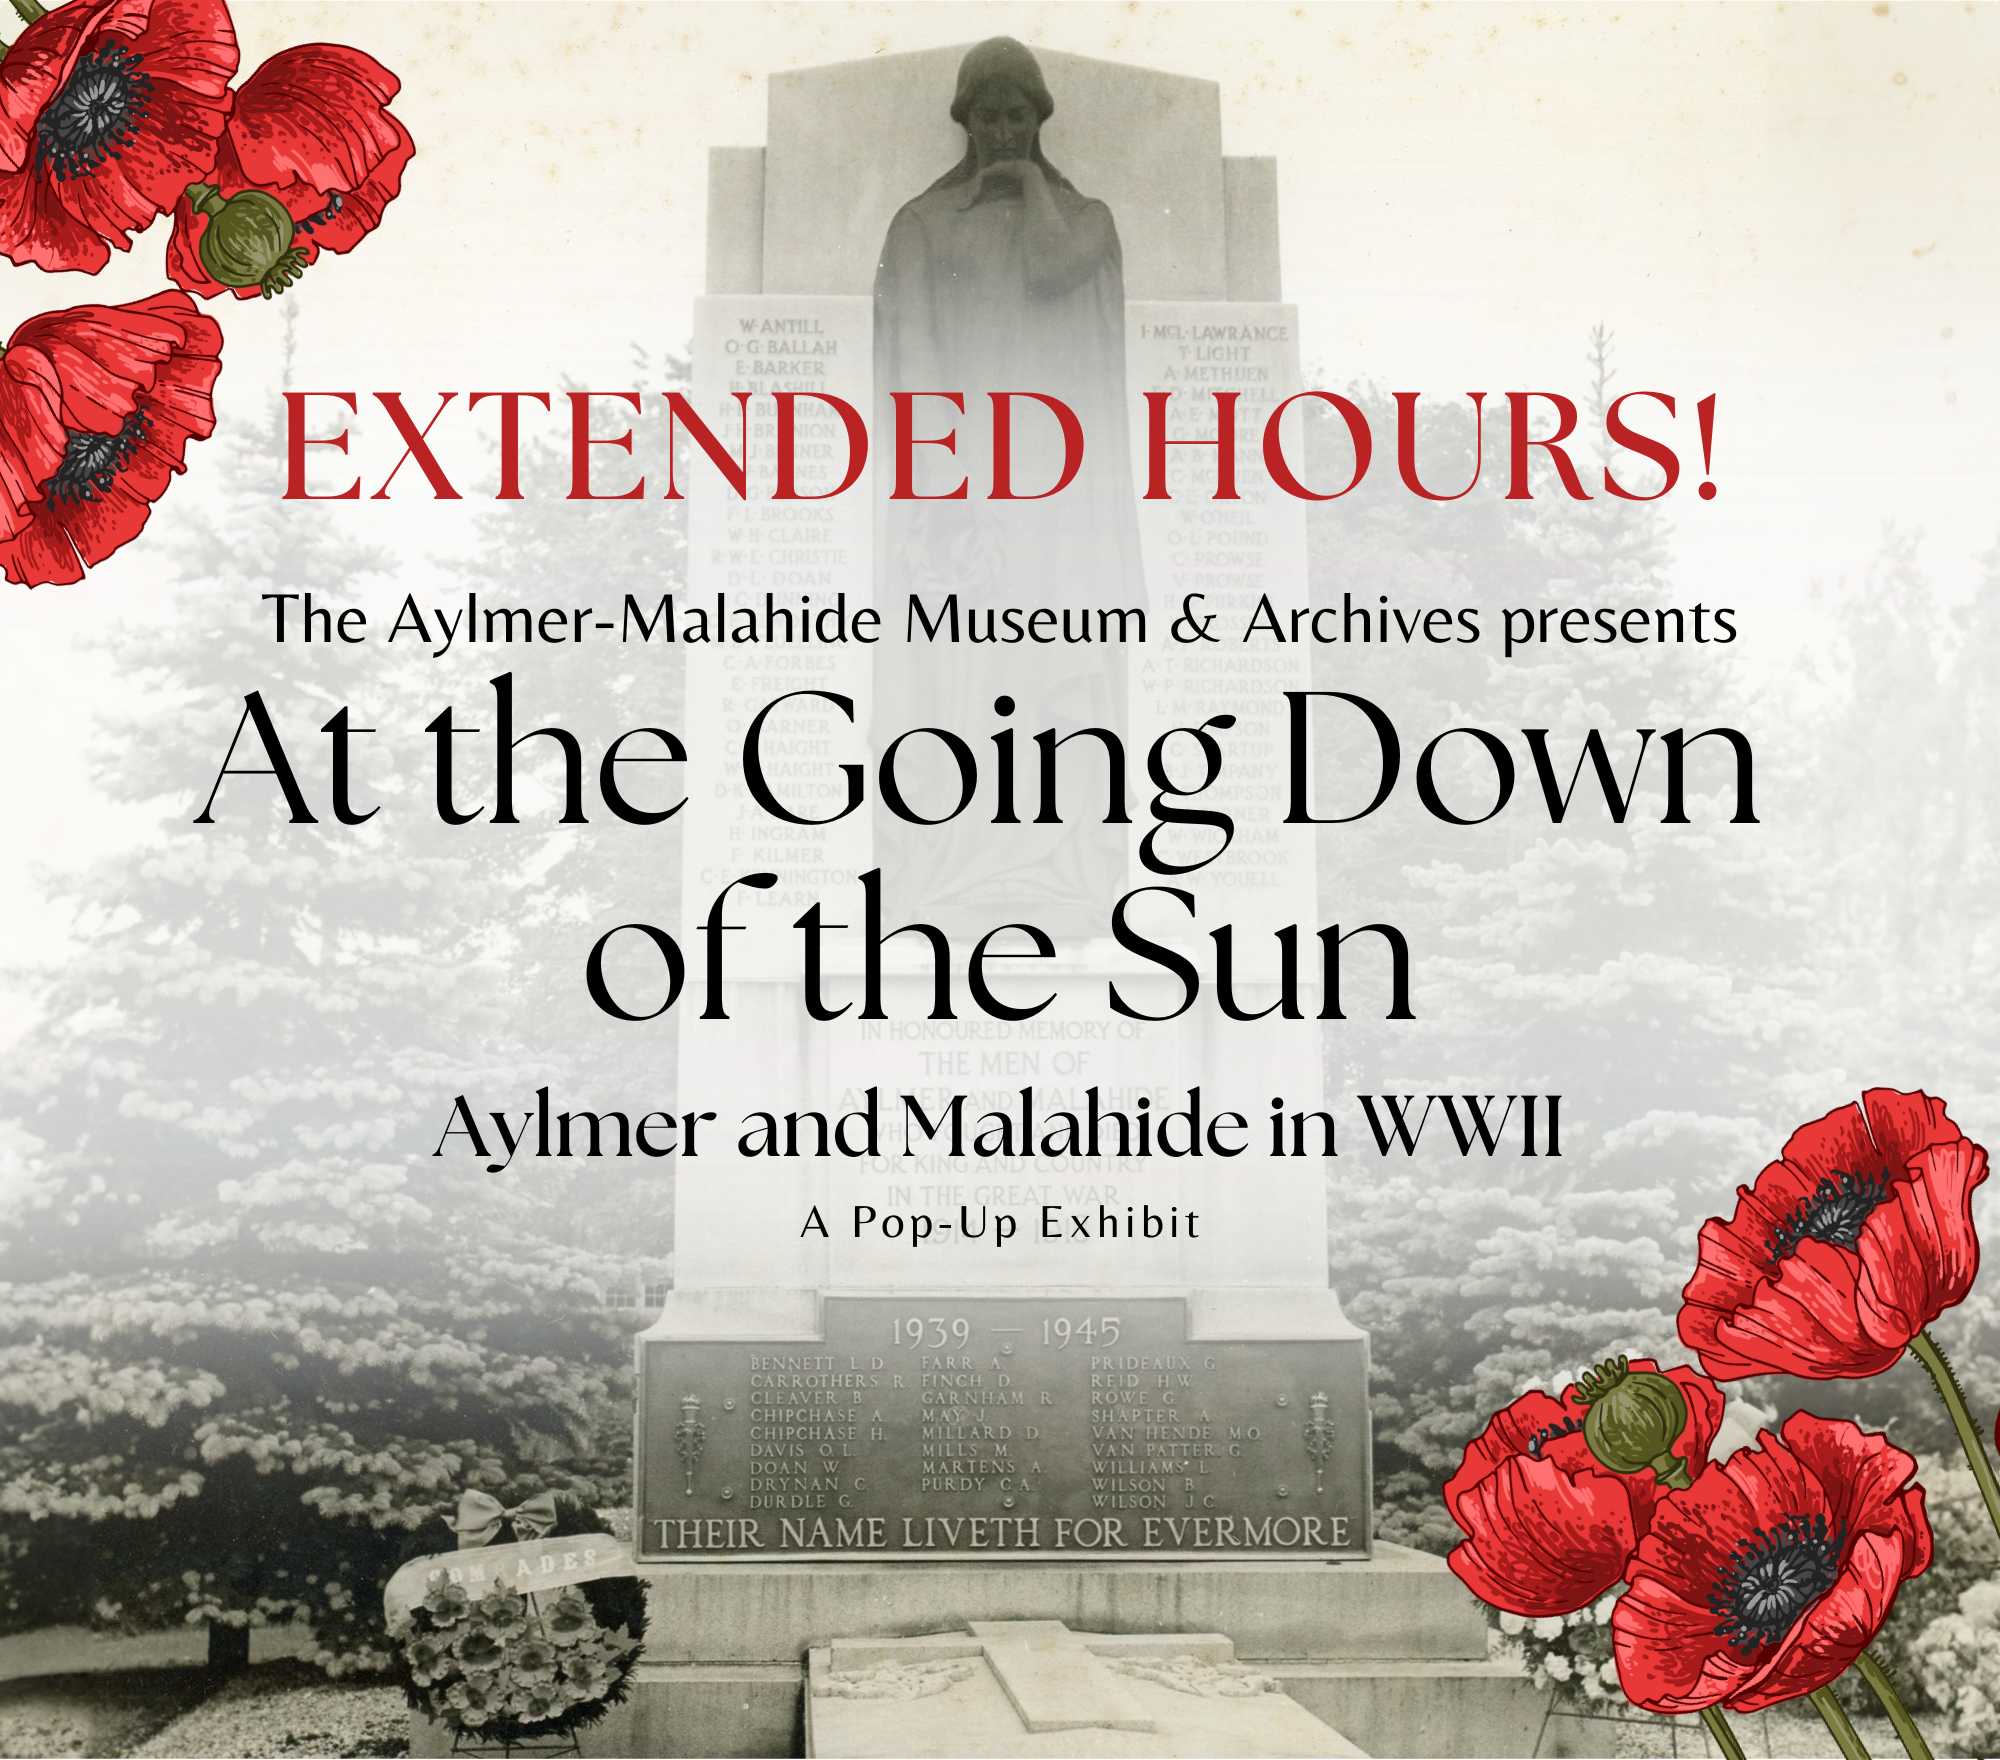 Extended Hours! At the Going Down of the Sun: Aylmer and Malahide in WWII